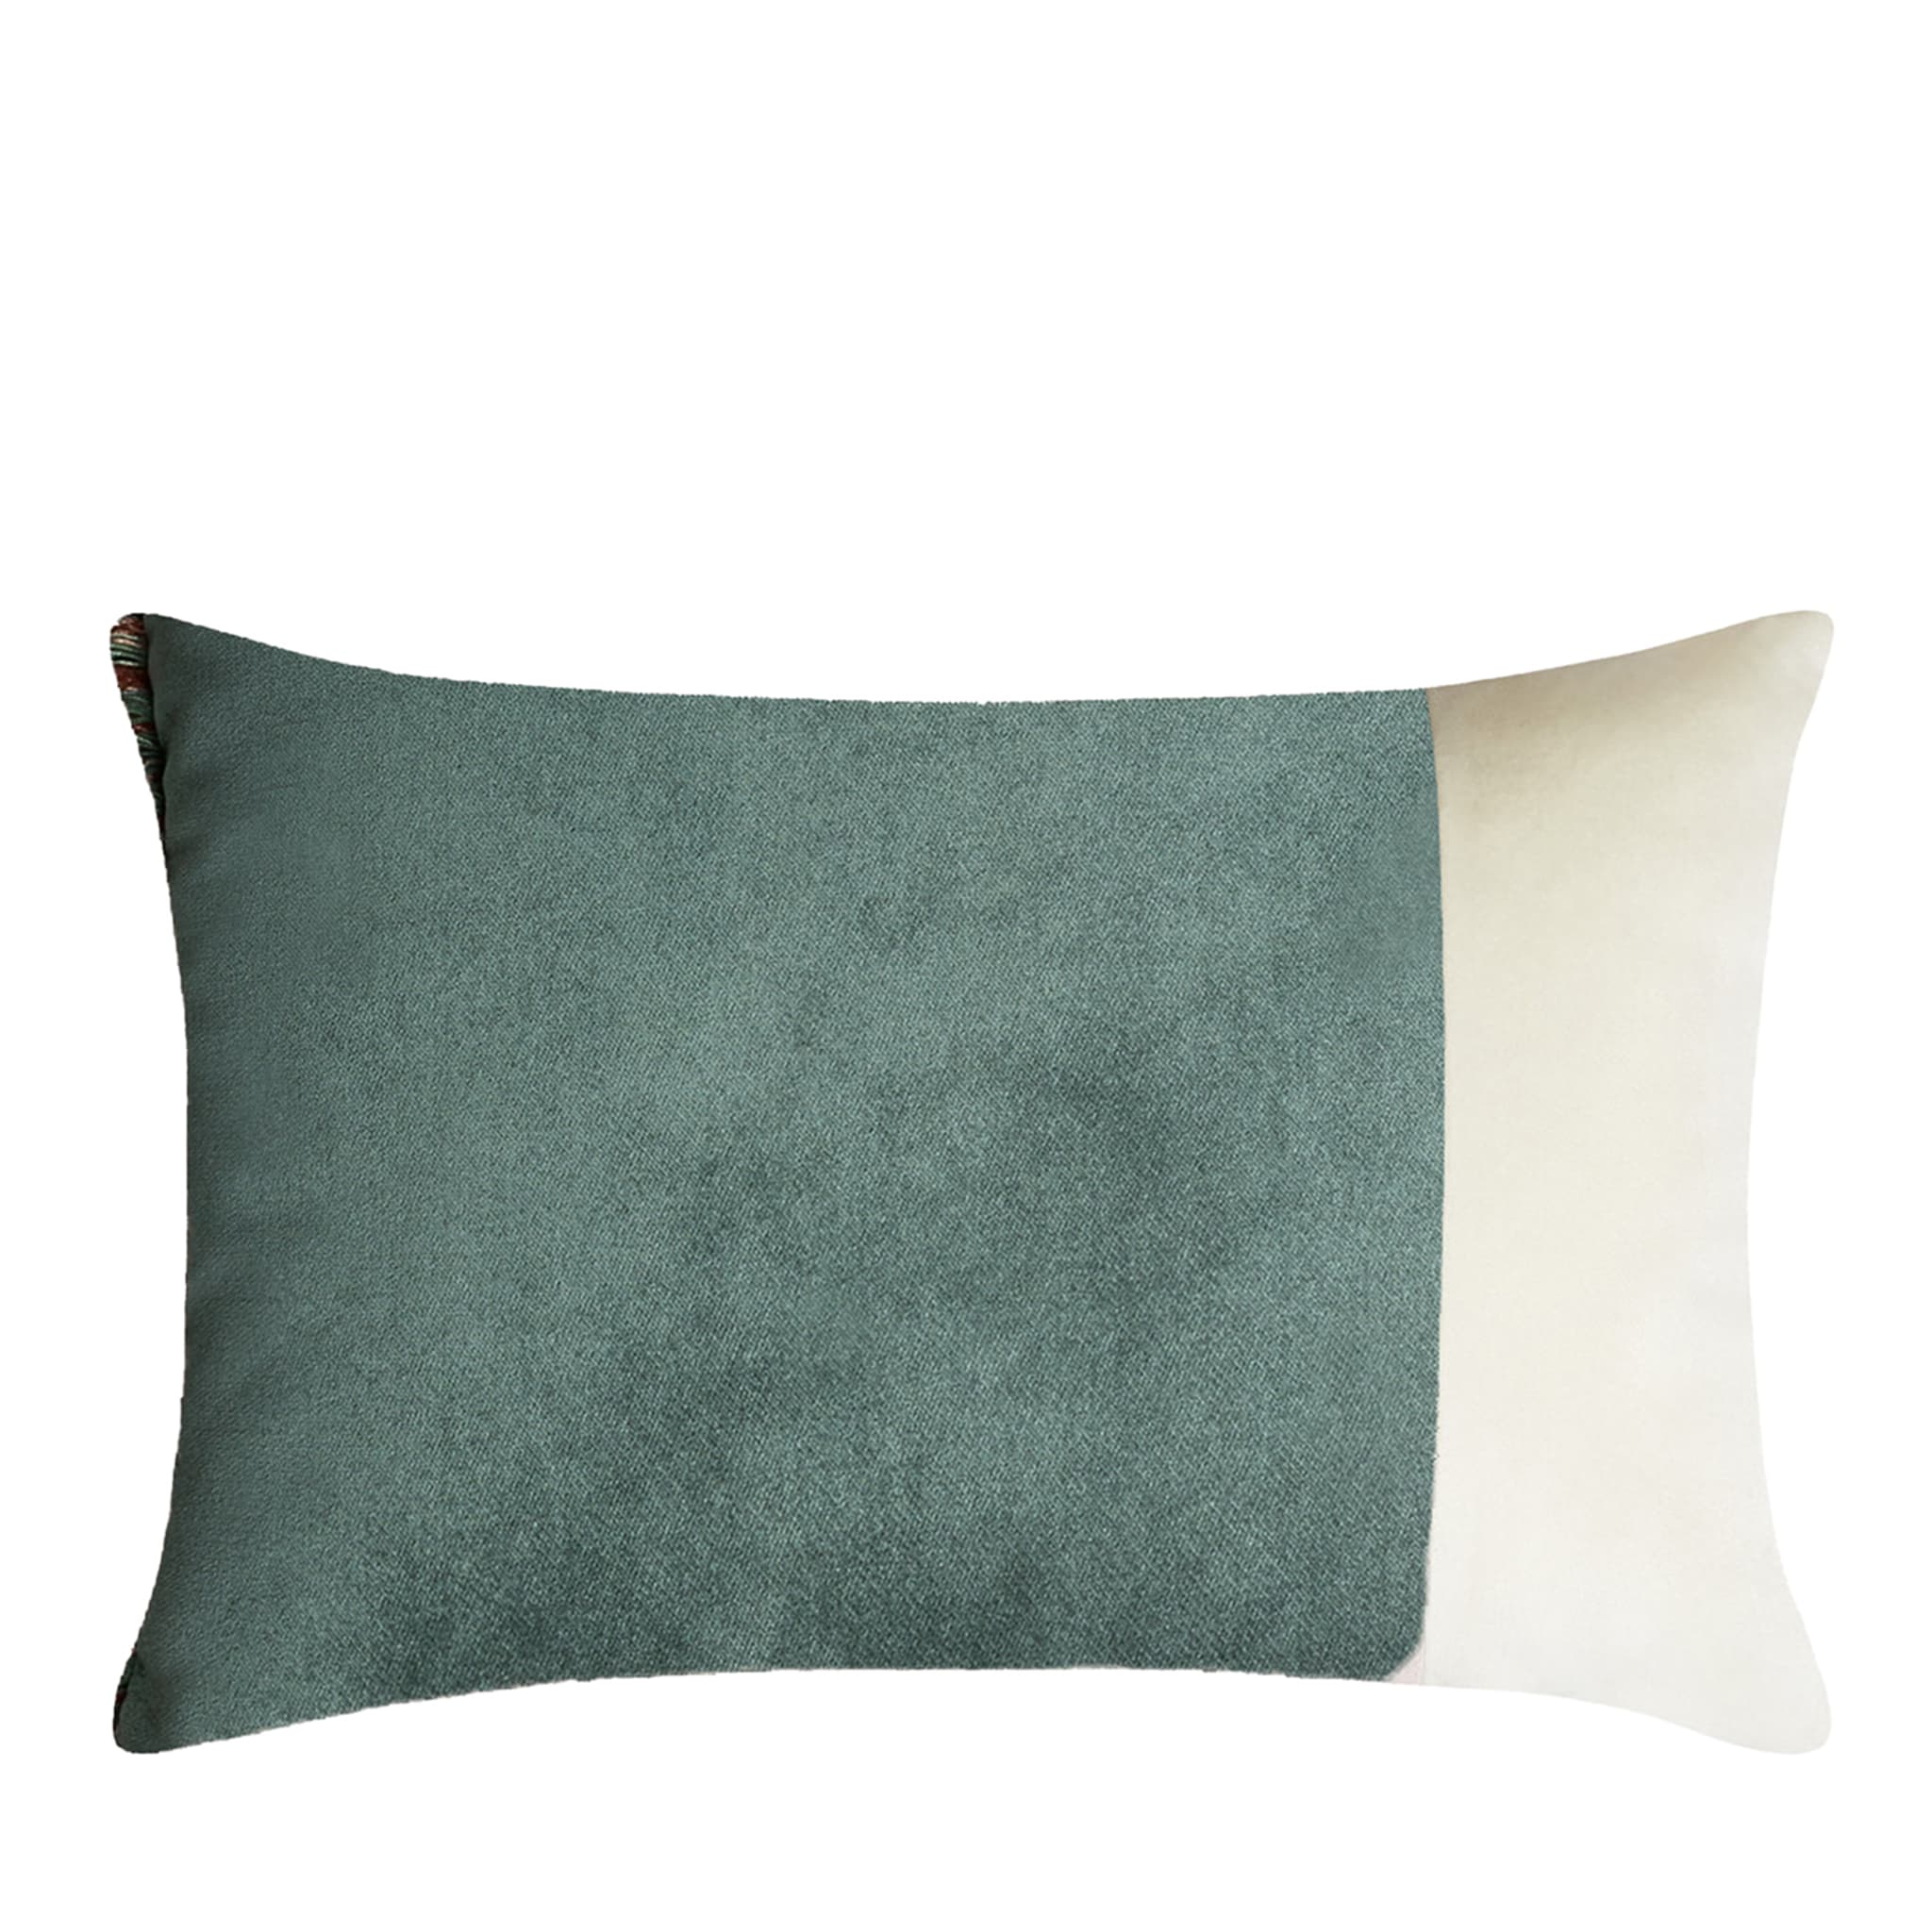 Double Teal and White Rectangular Cushion - Main view